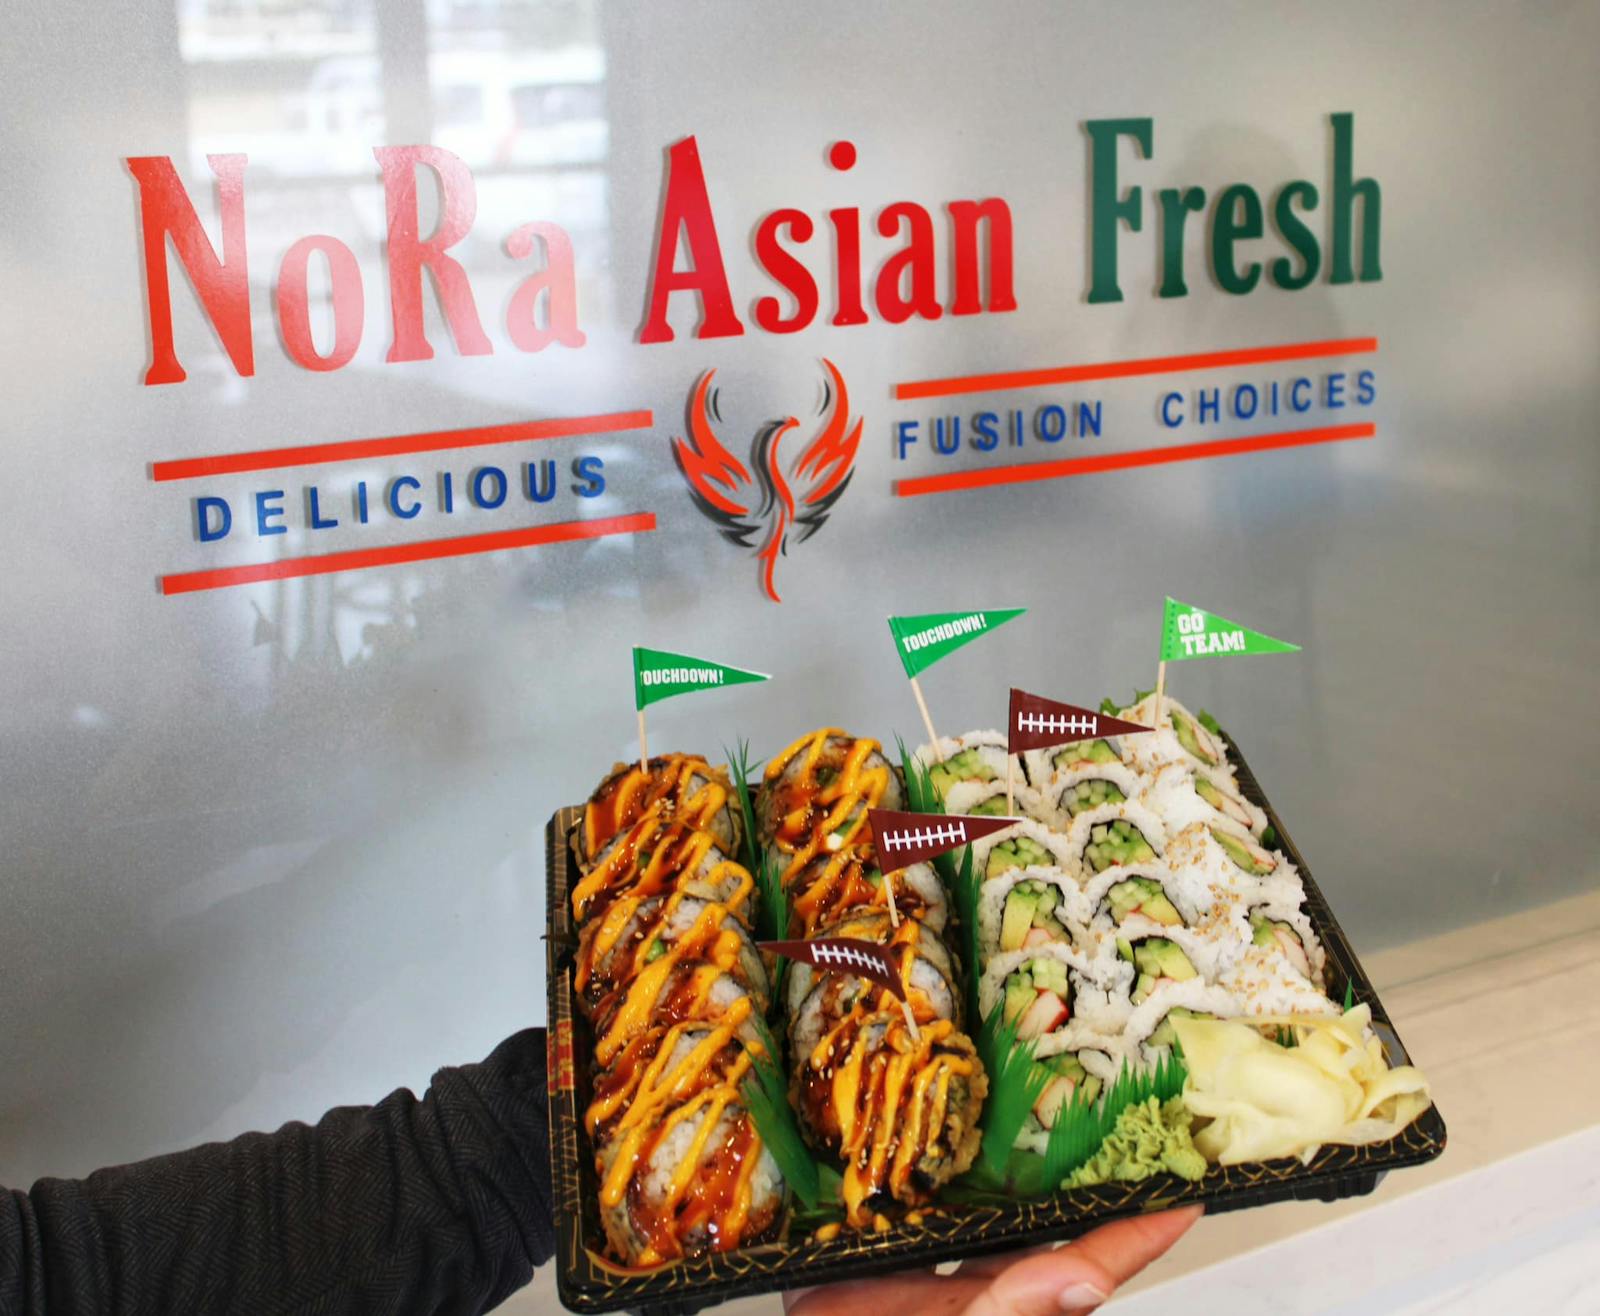 Plate of food at NoRa Asian Fresh restaurant window